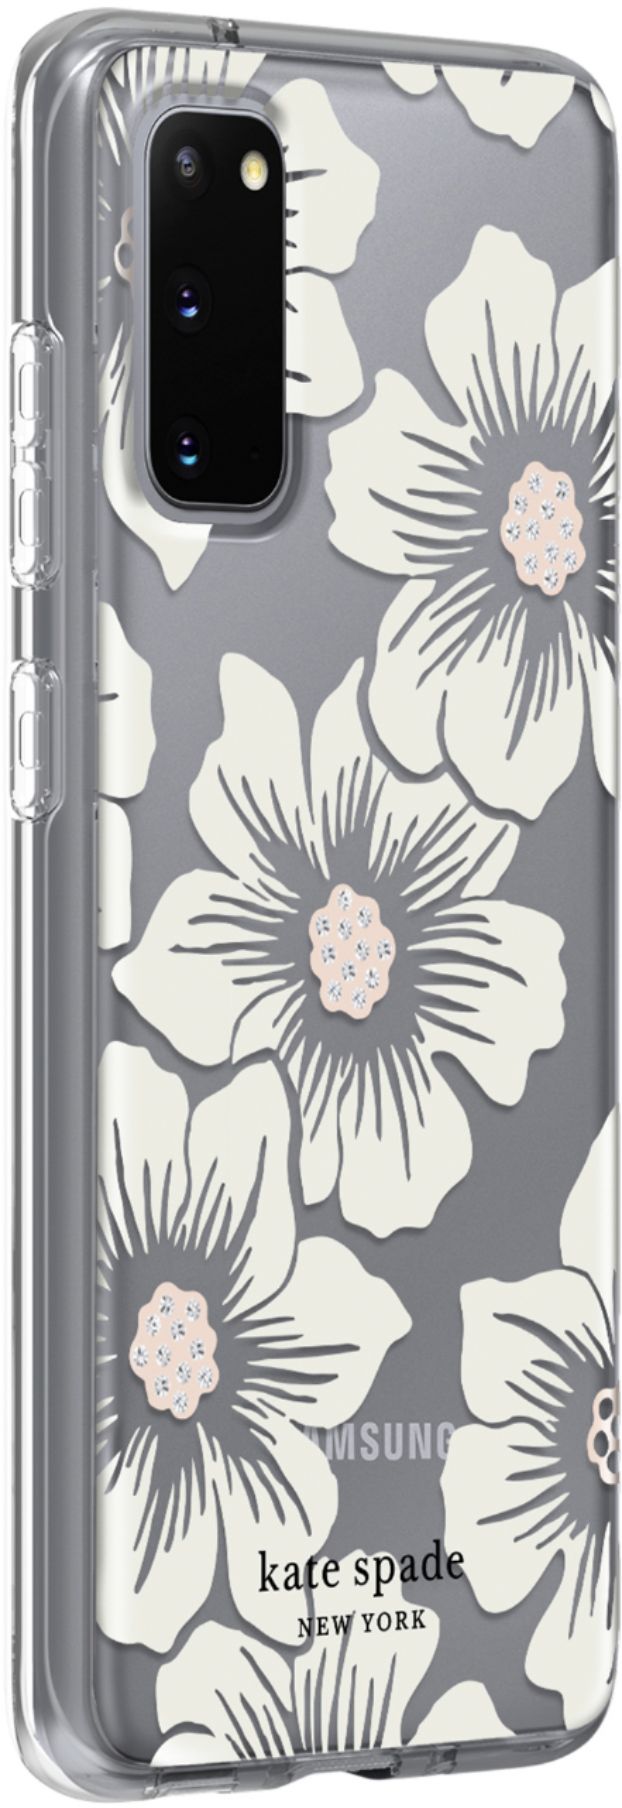 Angle View: kate spade new york - Protective Hard-Shell Case for Samsung Galaxy S20 5G - Hollyhock Floral Clear/Cream With Stones